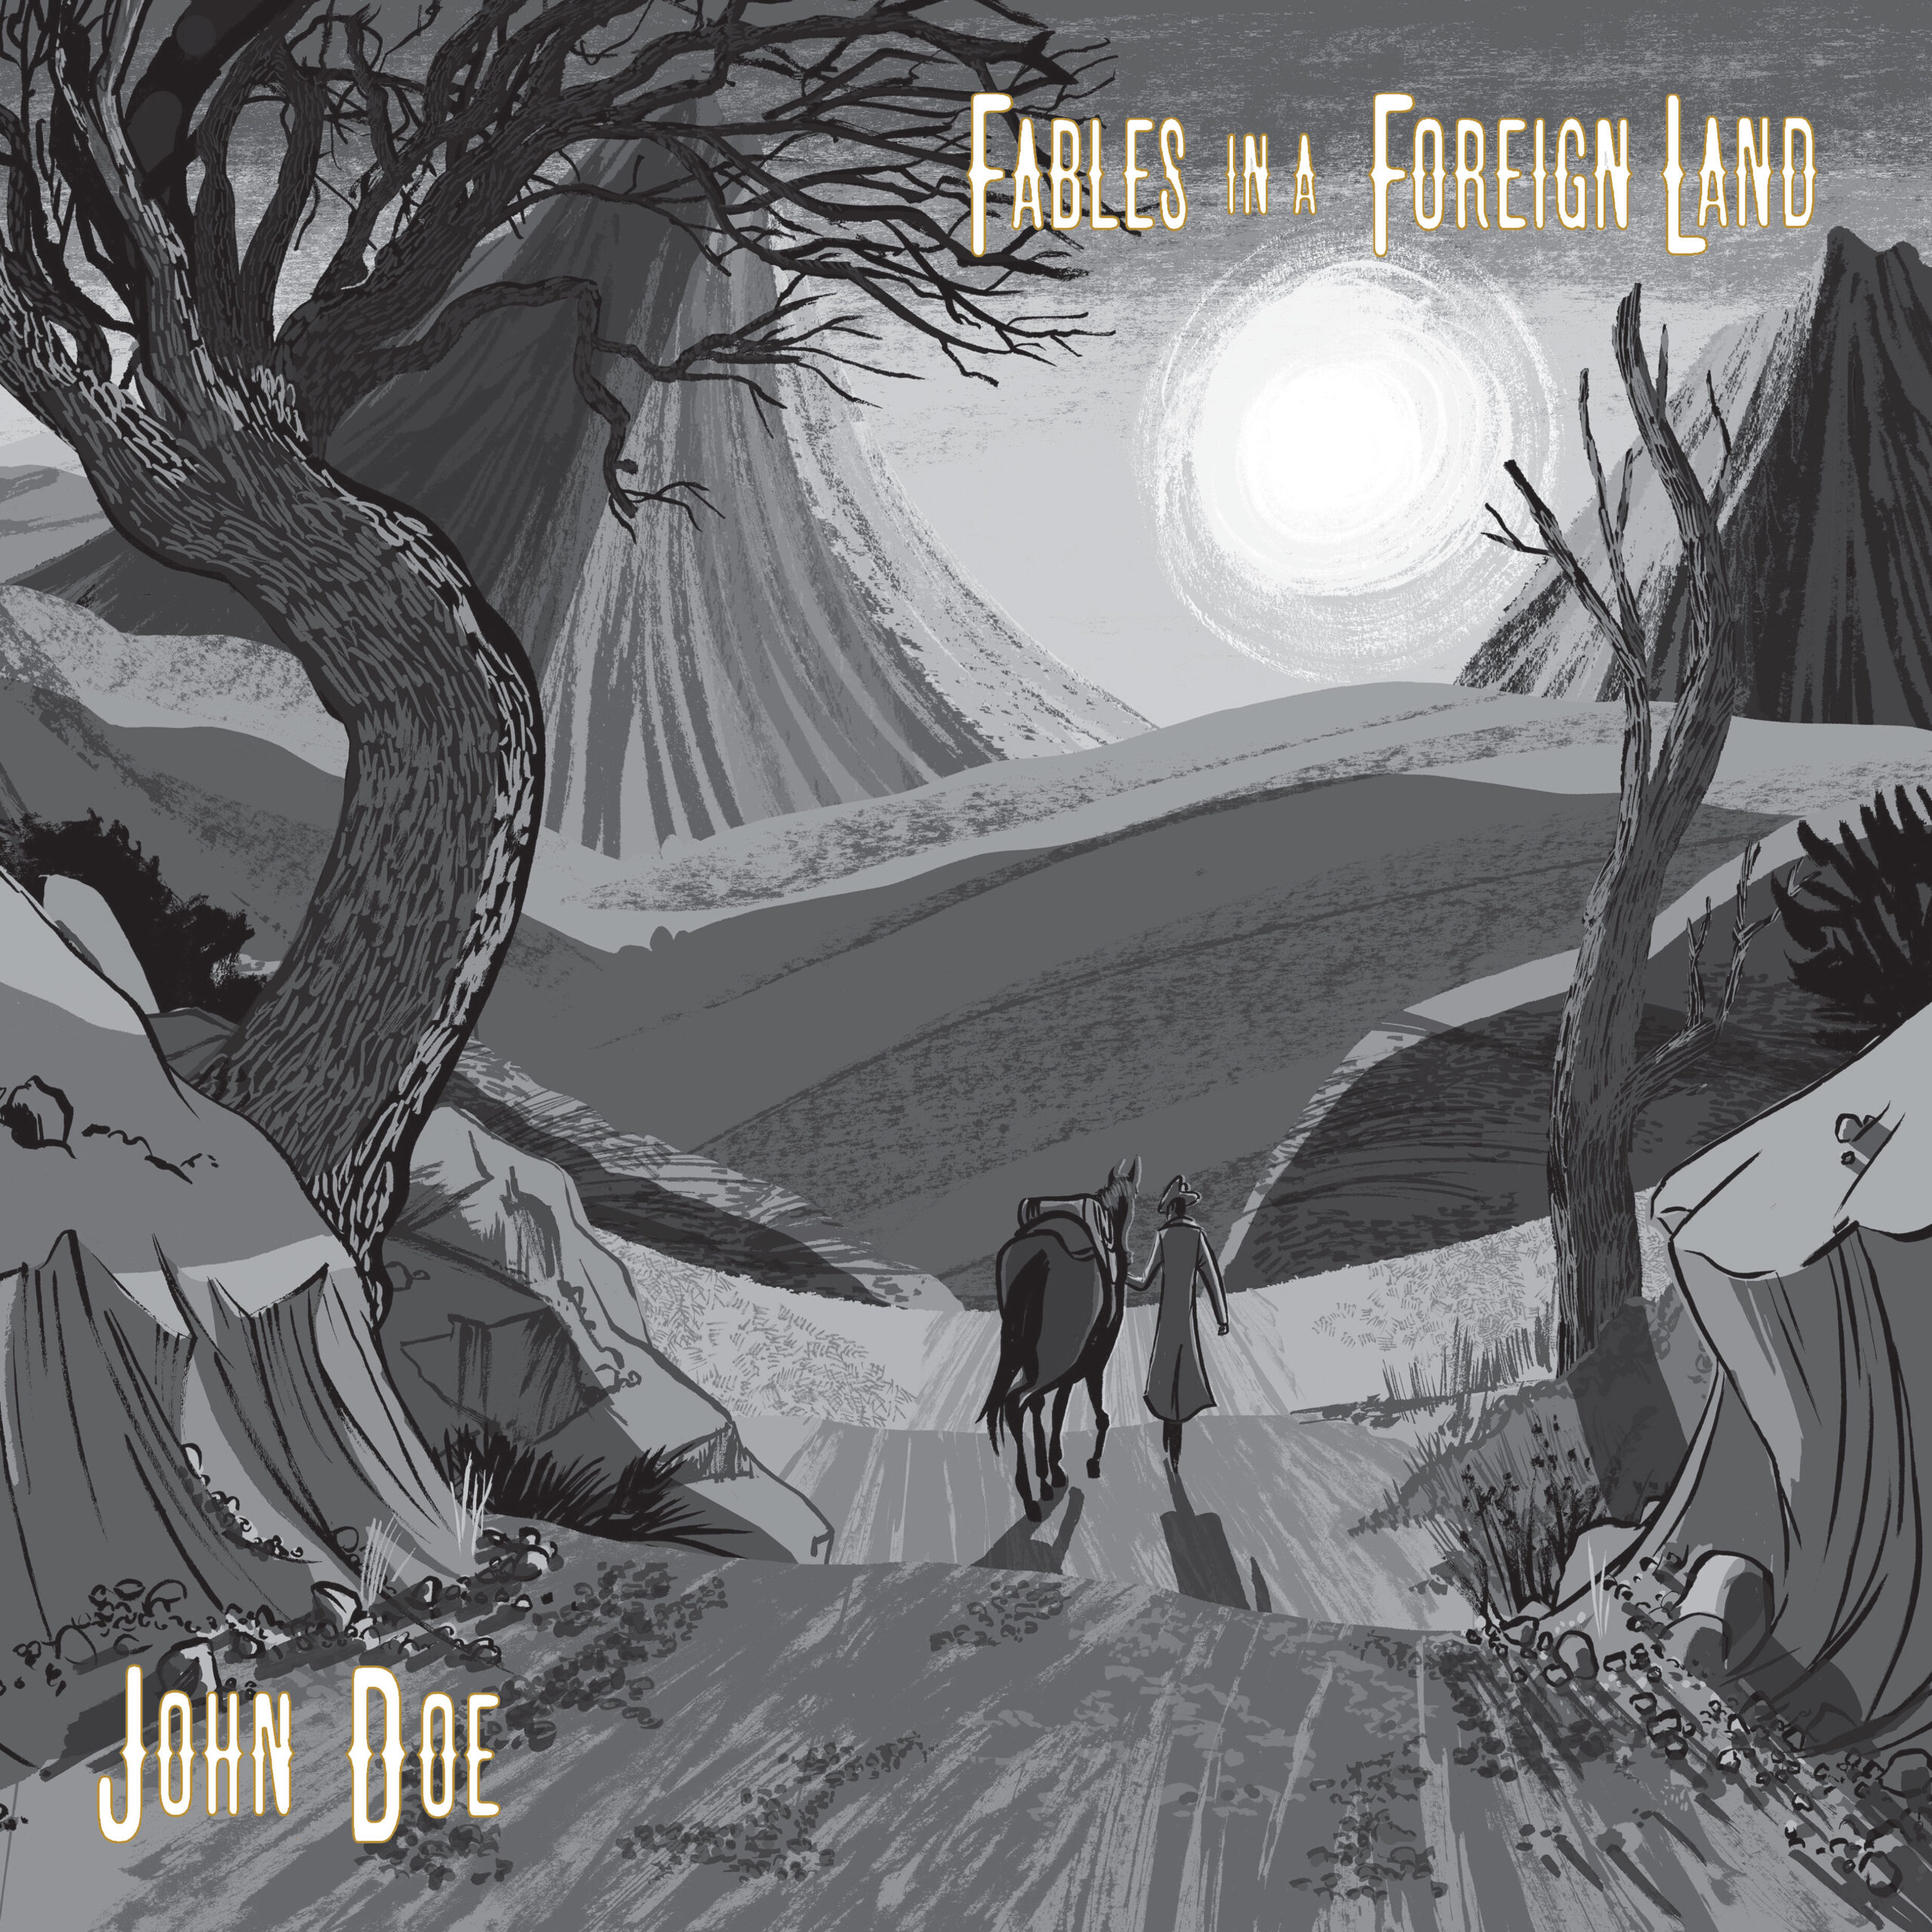 Fables in a Foreign Land, John Doe